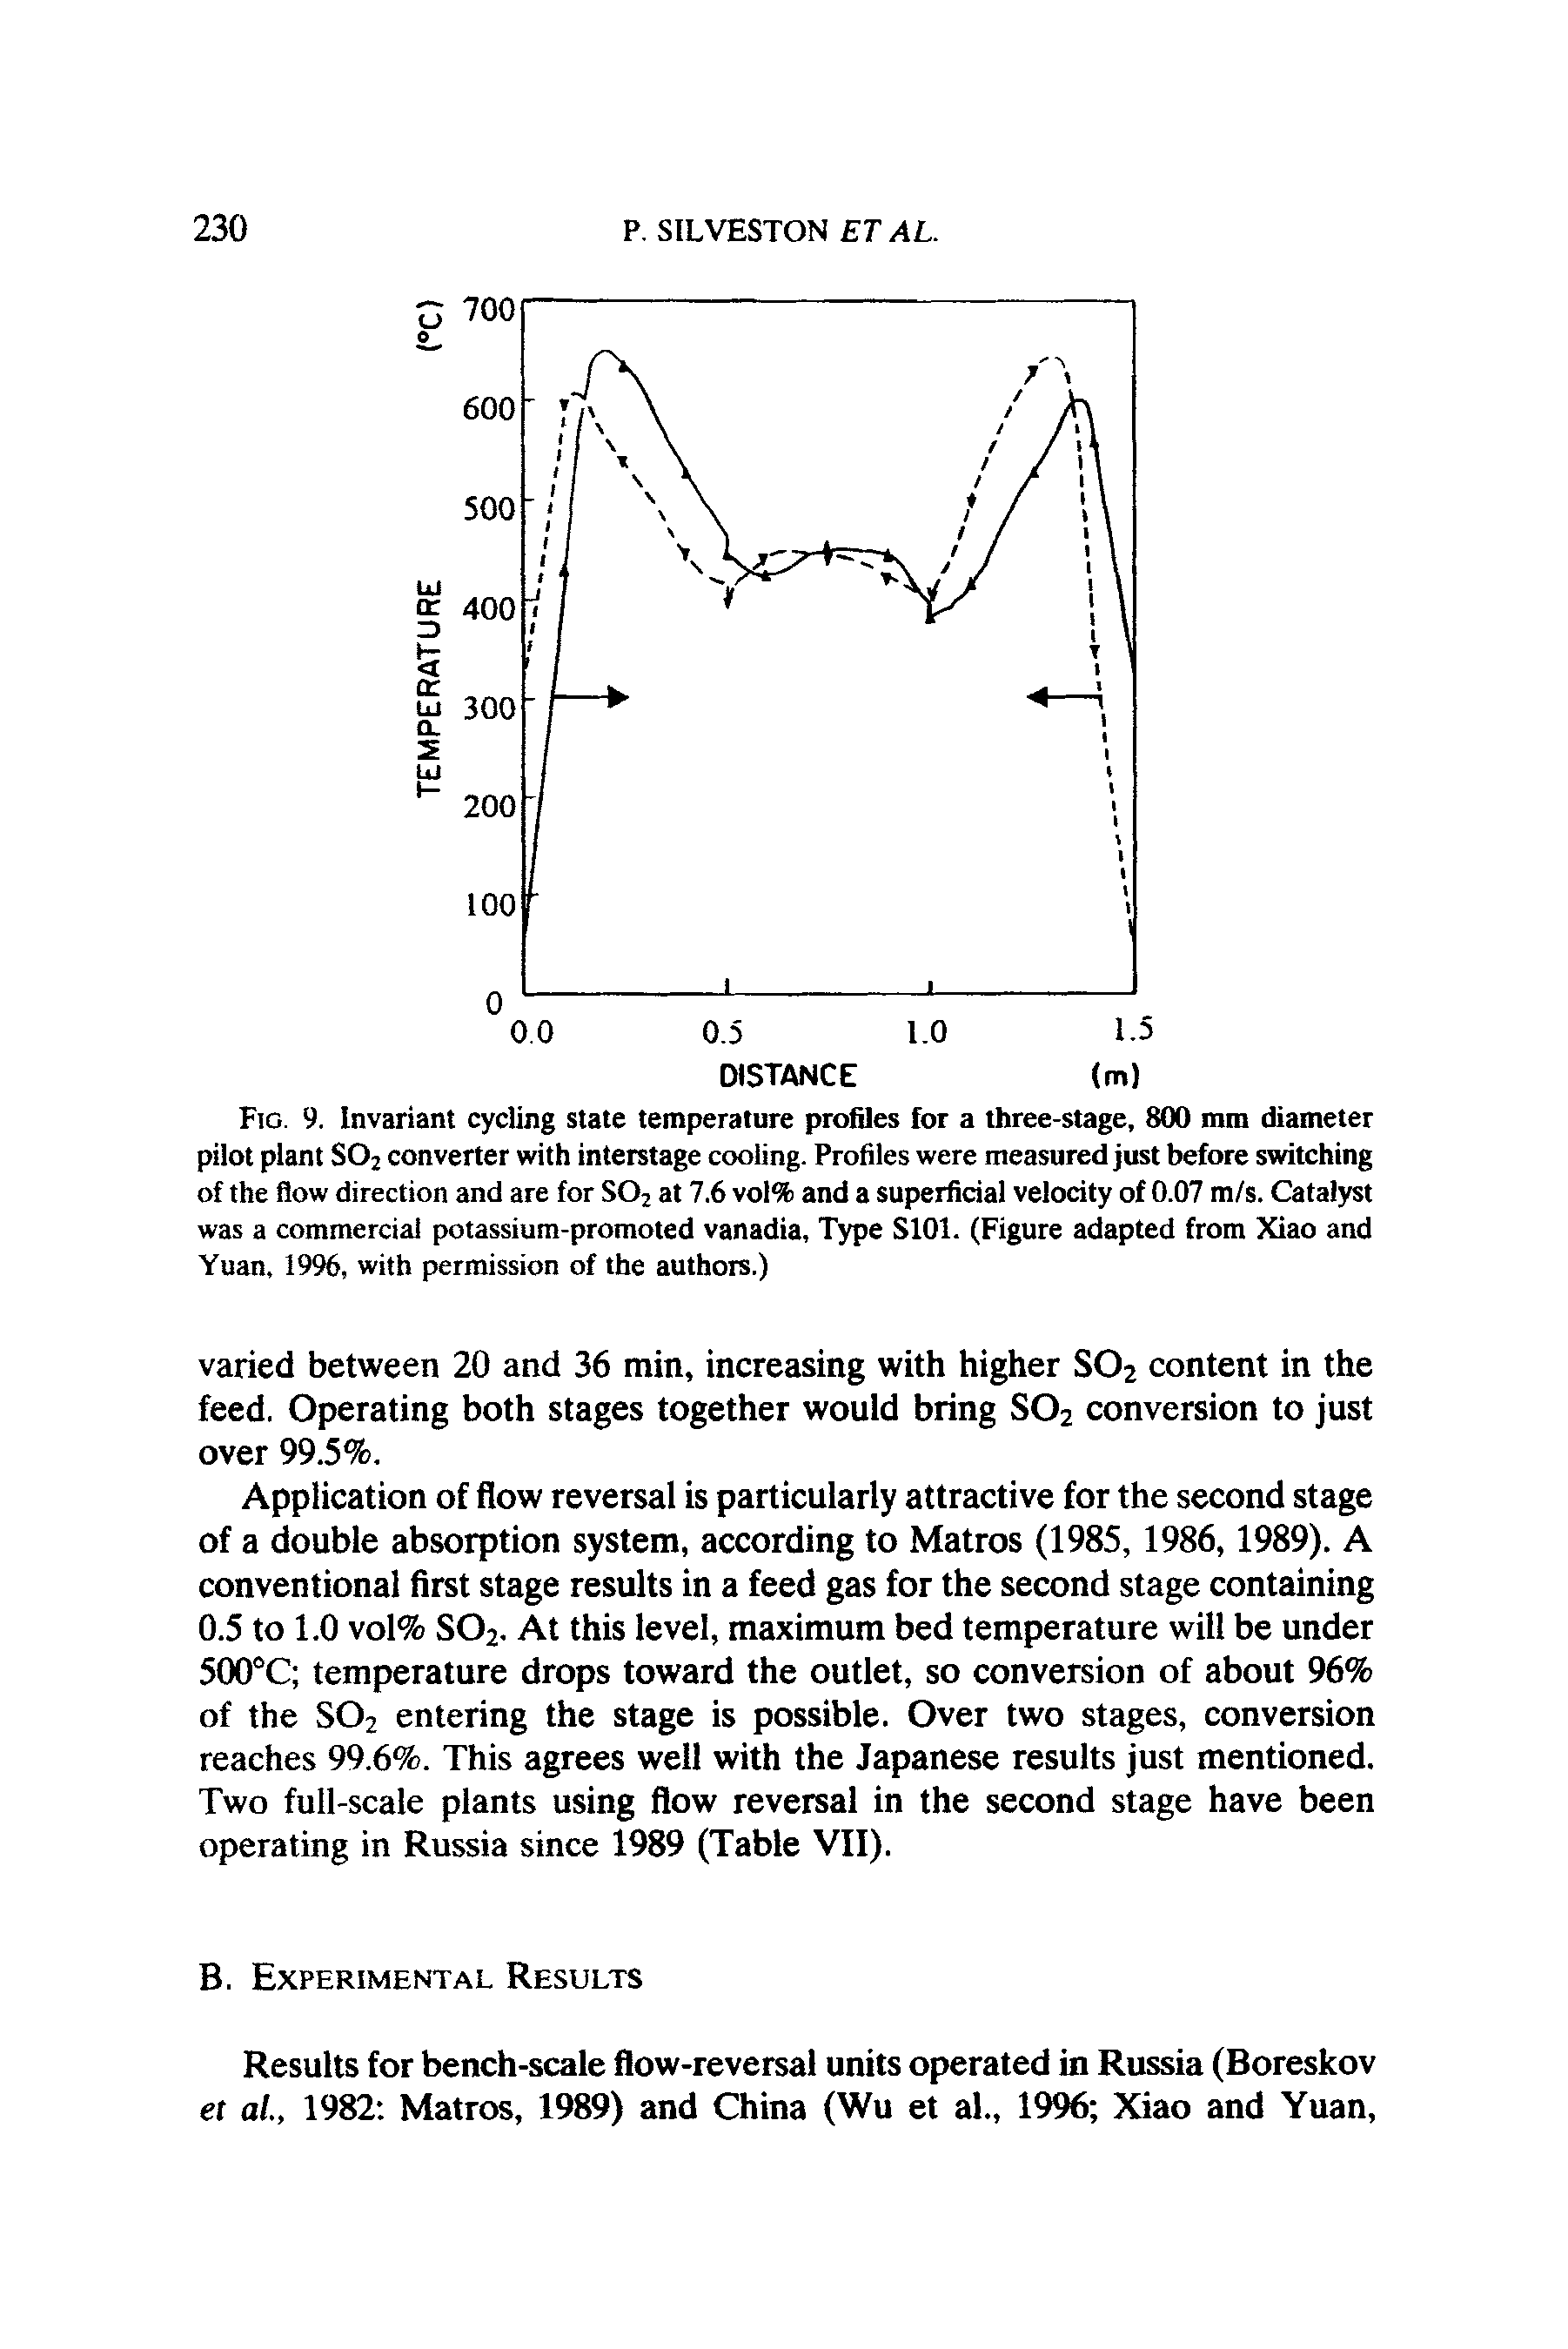 Fig. 9. Invariant cycling state temperature profiles for a three-stage, 800 mm diameter pilot plant S02 converter with interstage cooling. Profiles were measured just before switching of the flow direction and are for S02 at 7.6 vol% and a superficial velocity of 0.07 m/s. Catalyst was a commercial potassium-promoted vanadia, Type S101. (Figure adapted from Xiao and Yuan, 1996, with permission of the authors.)...